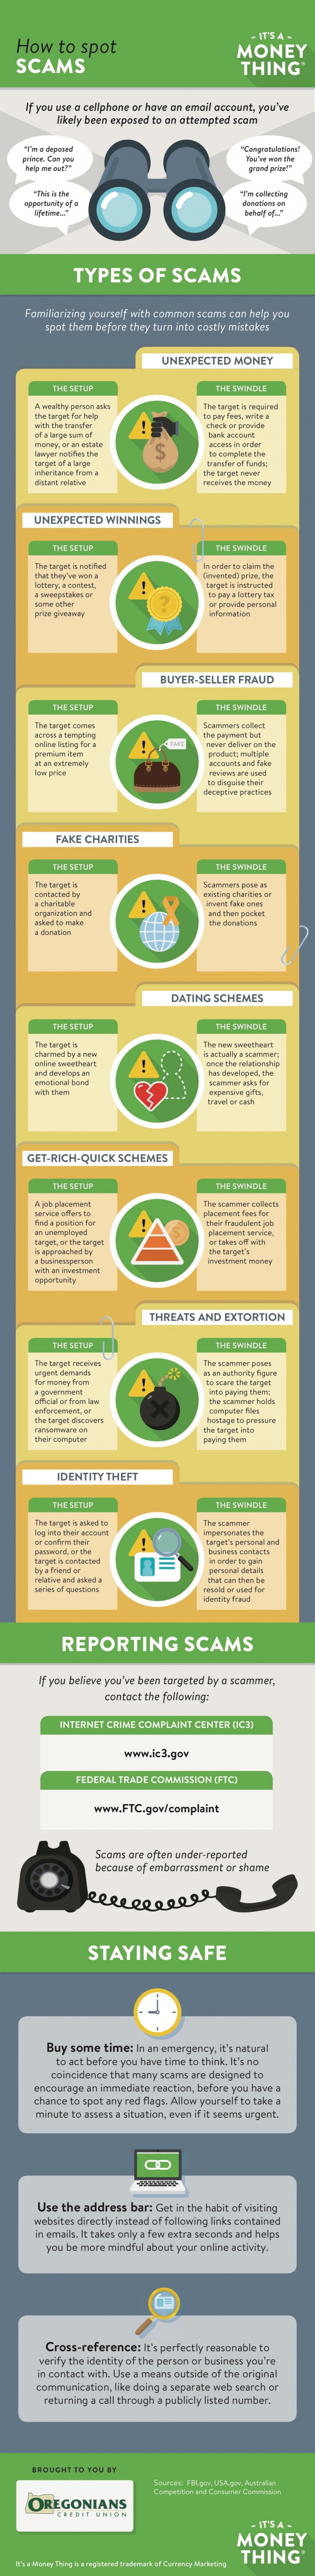 How to Spot Scams Infographic